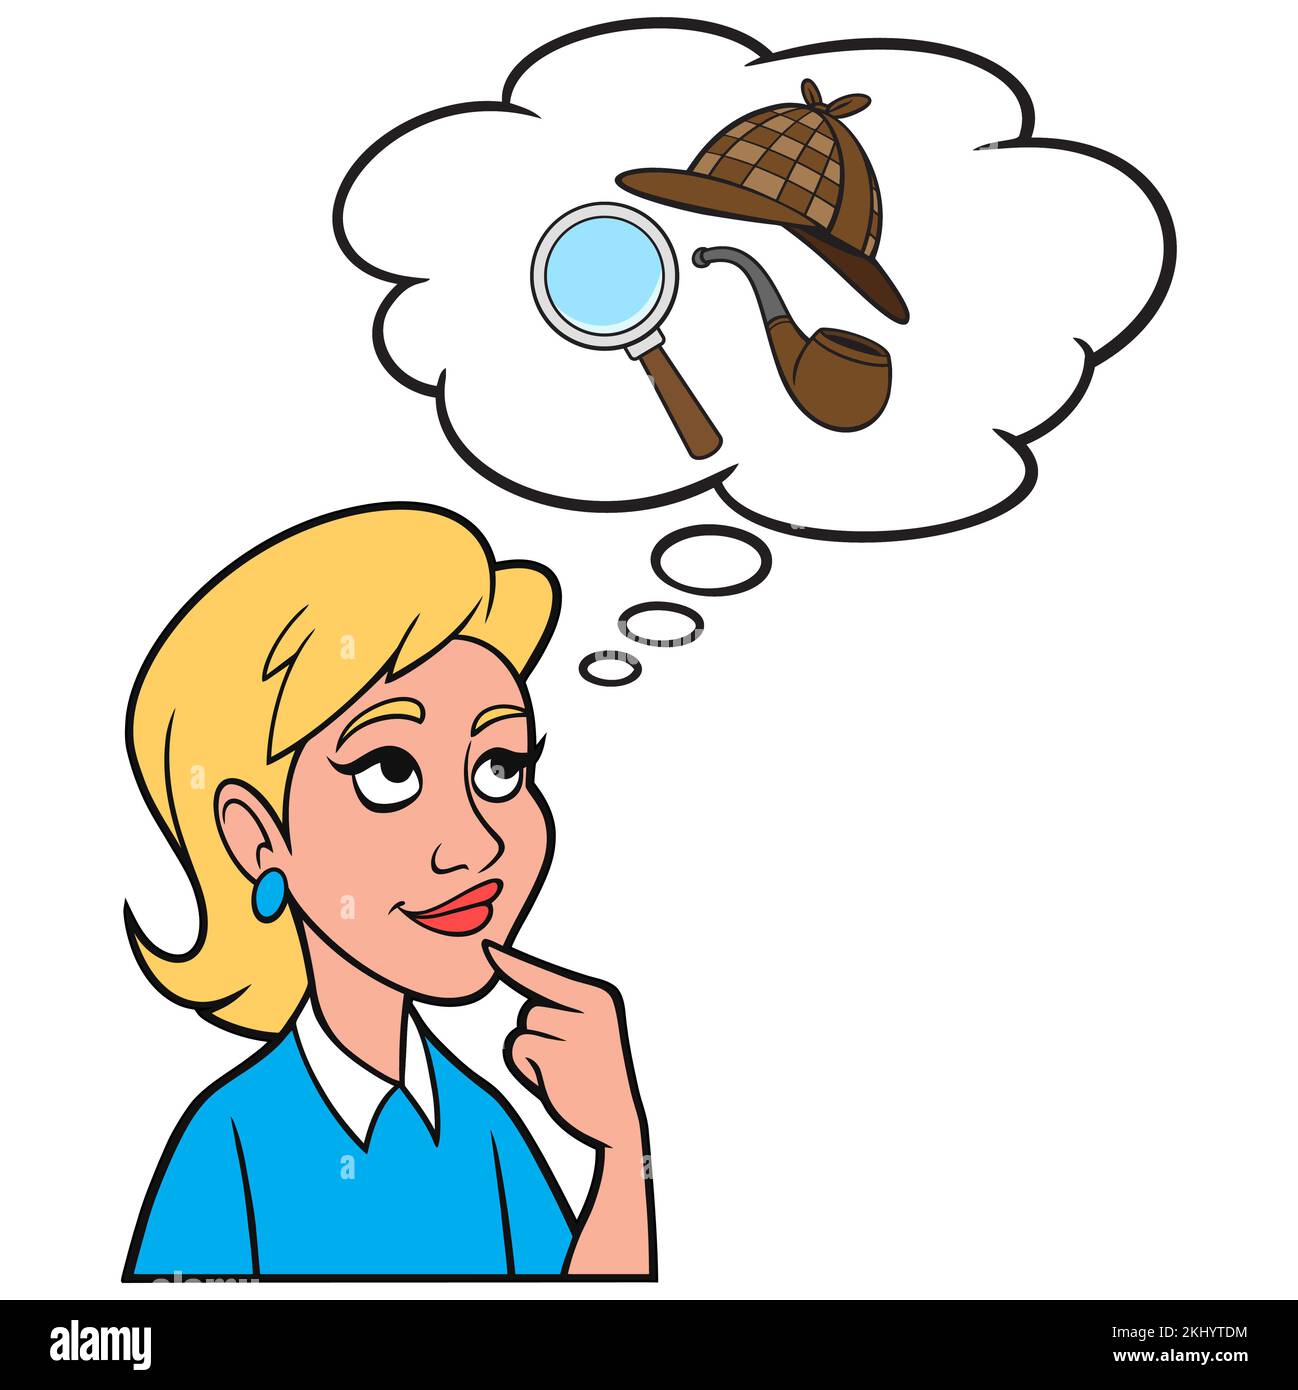 Girl thinking about Detective Work - A cartoon illustration of a Girl thinking about a career as a Detective. Stock Vector